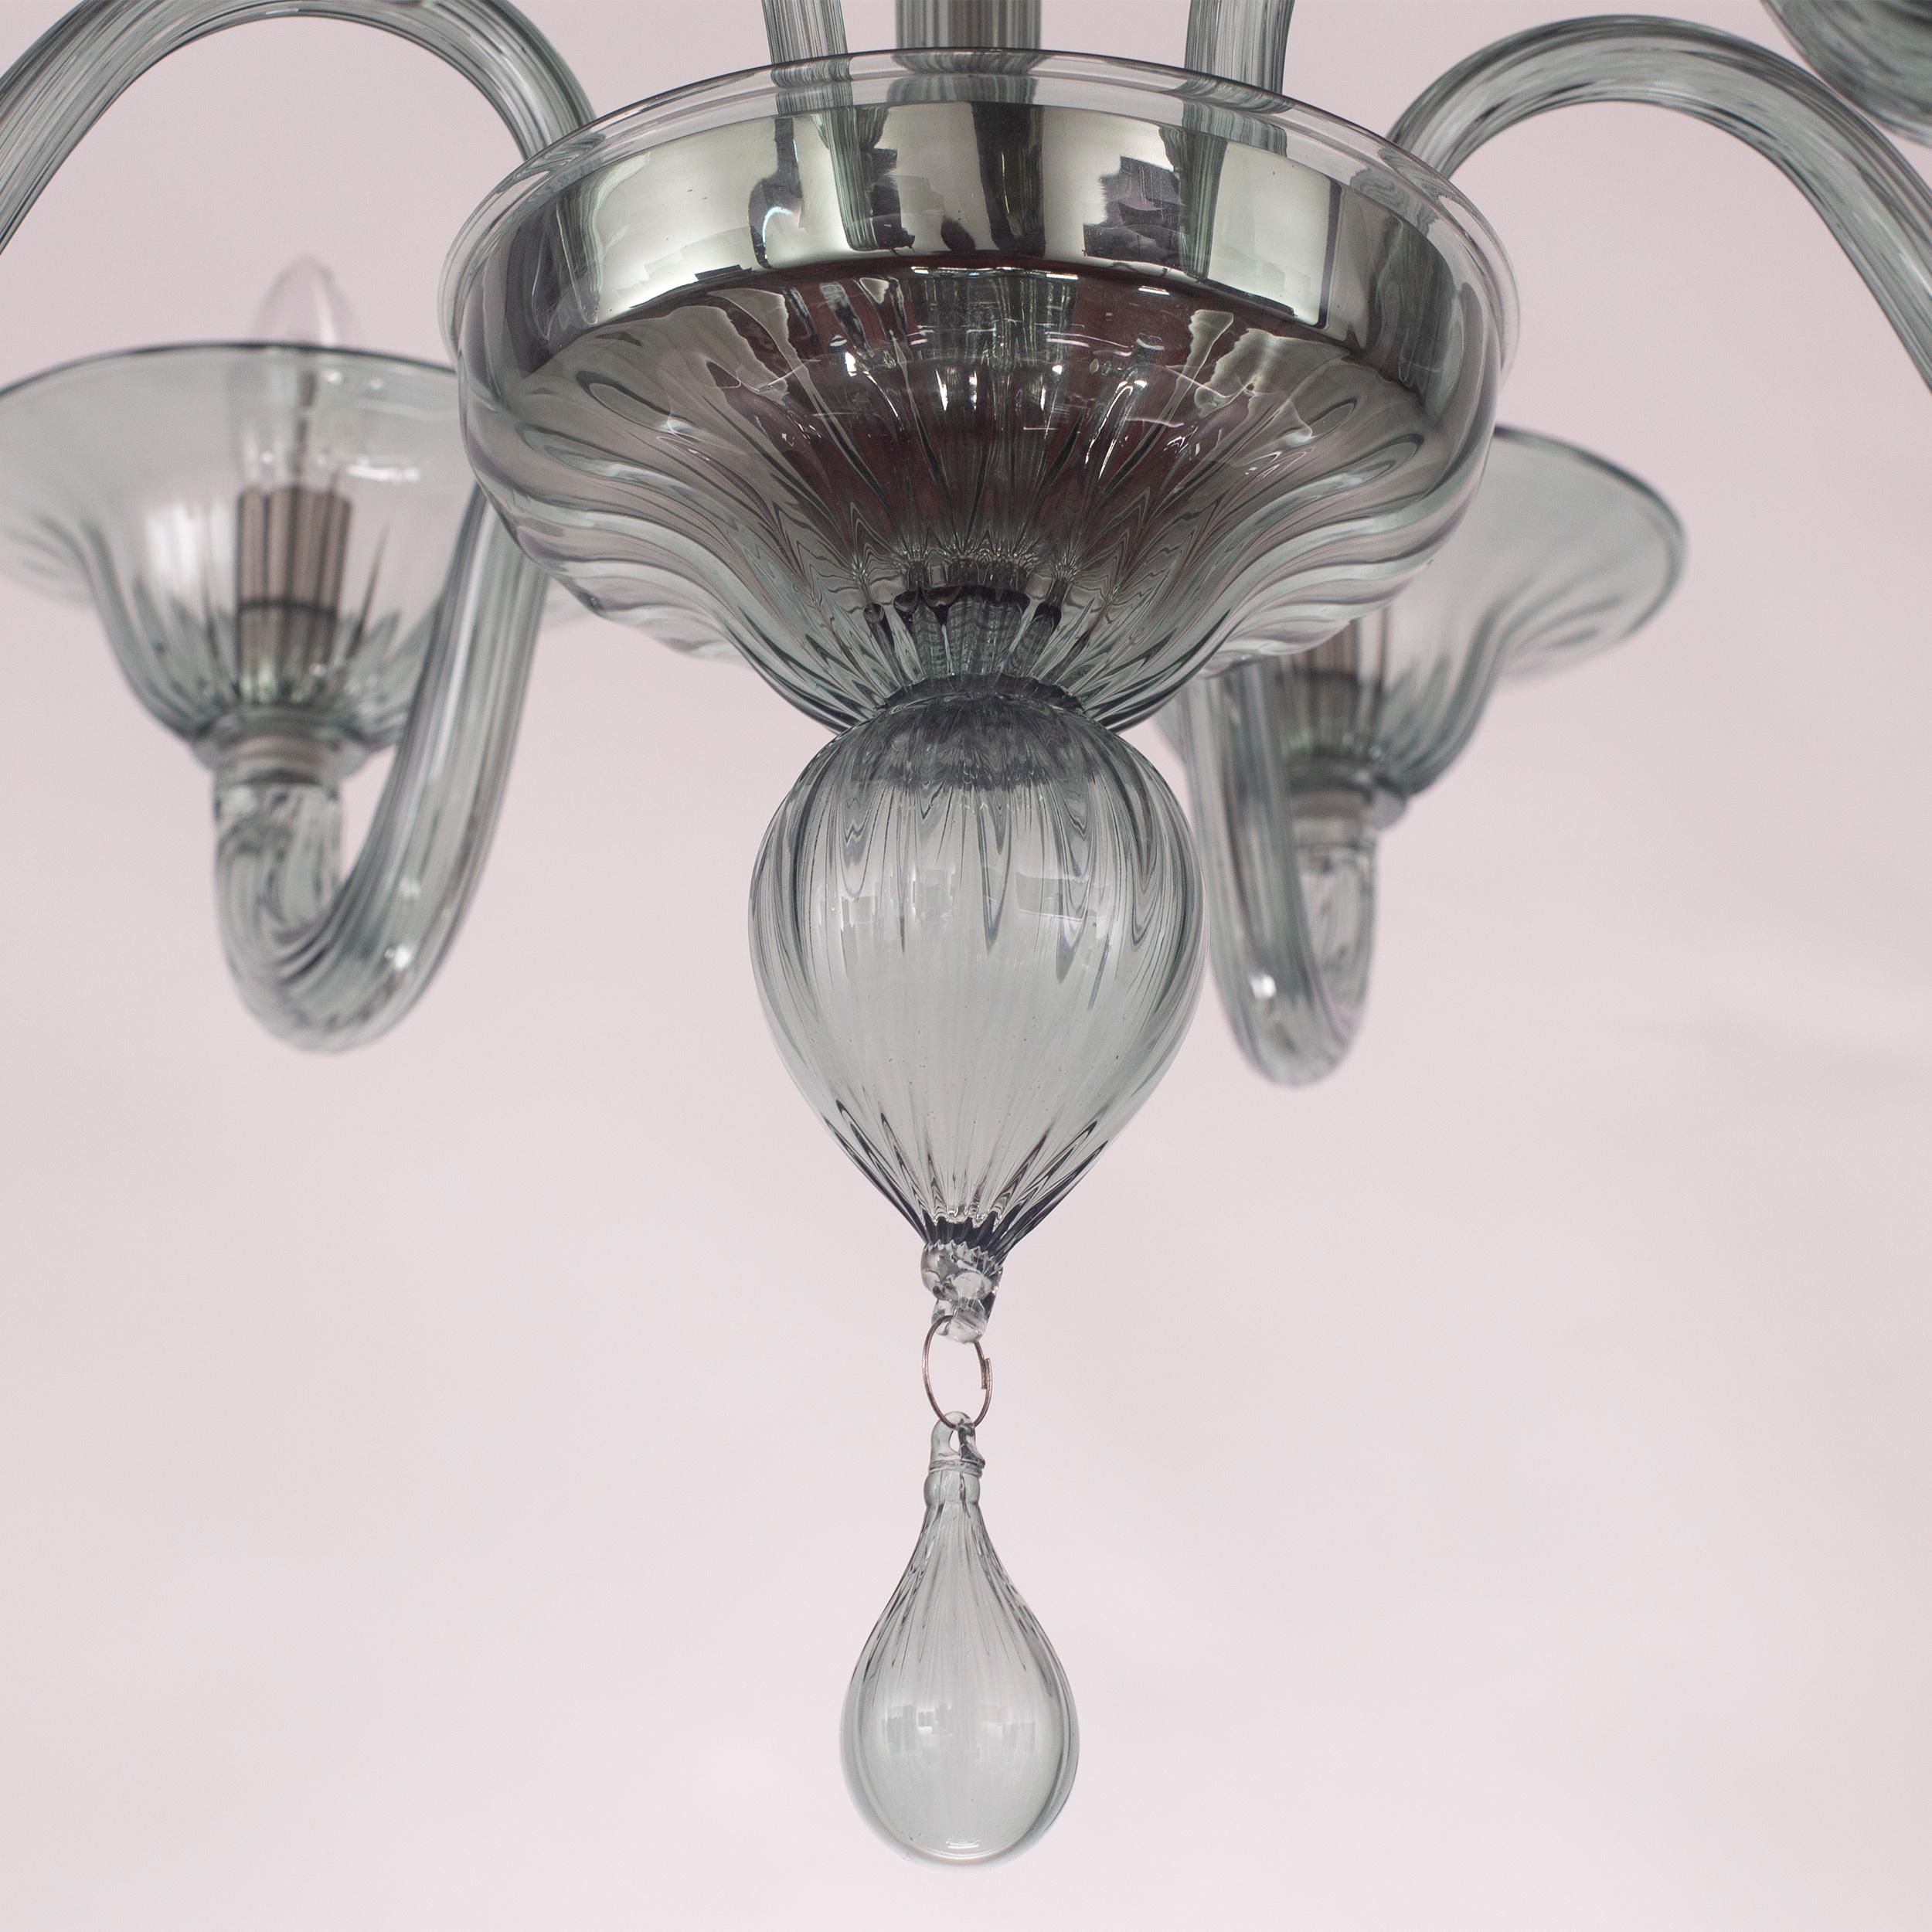 Simplicissimus Chandelier, 6 Arms grey green Murano Glass by Multiforme In New Condition For Sale In Trebaseleghe, IT